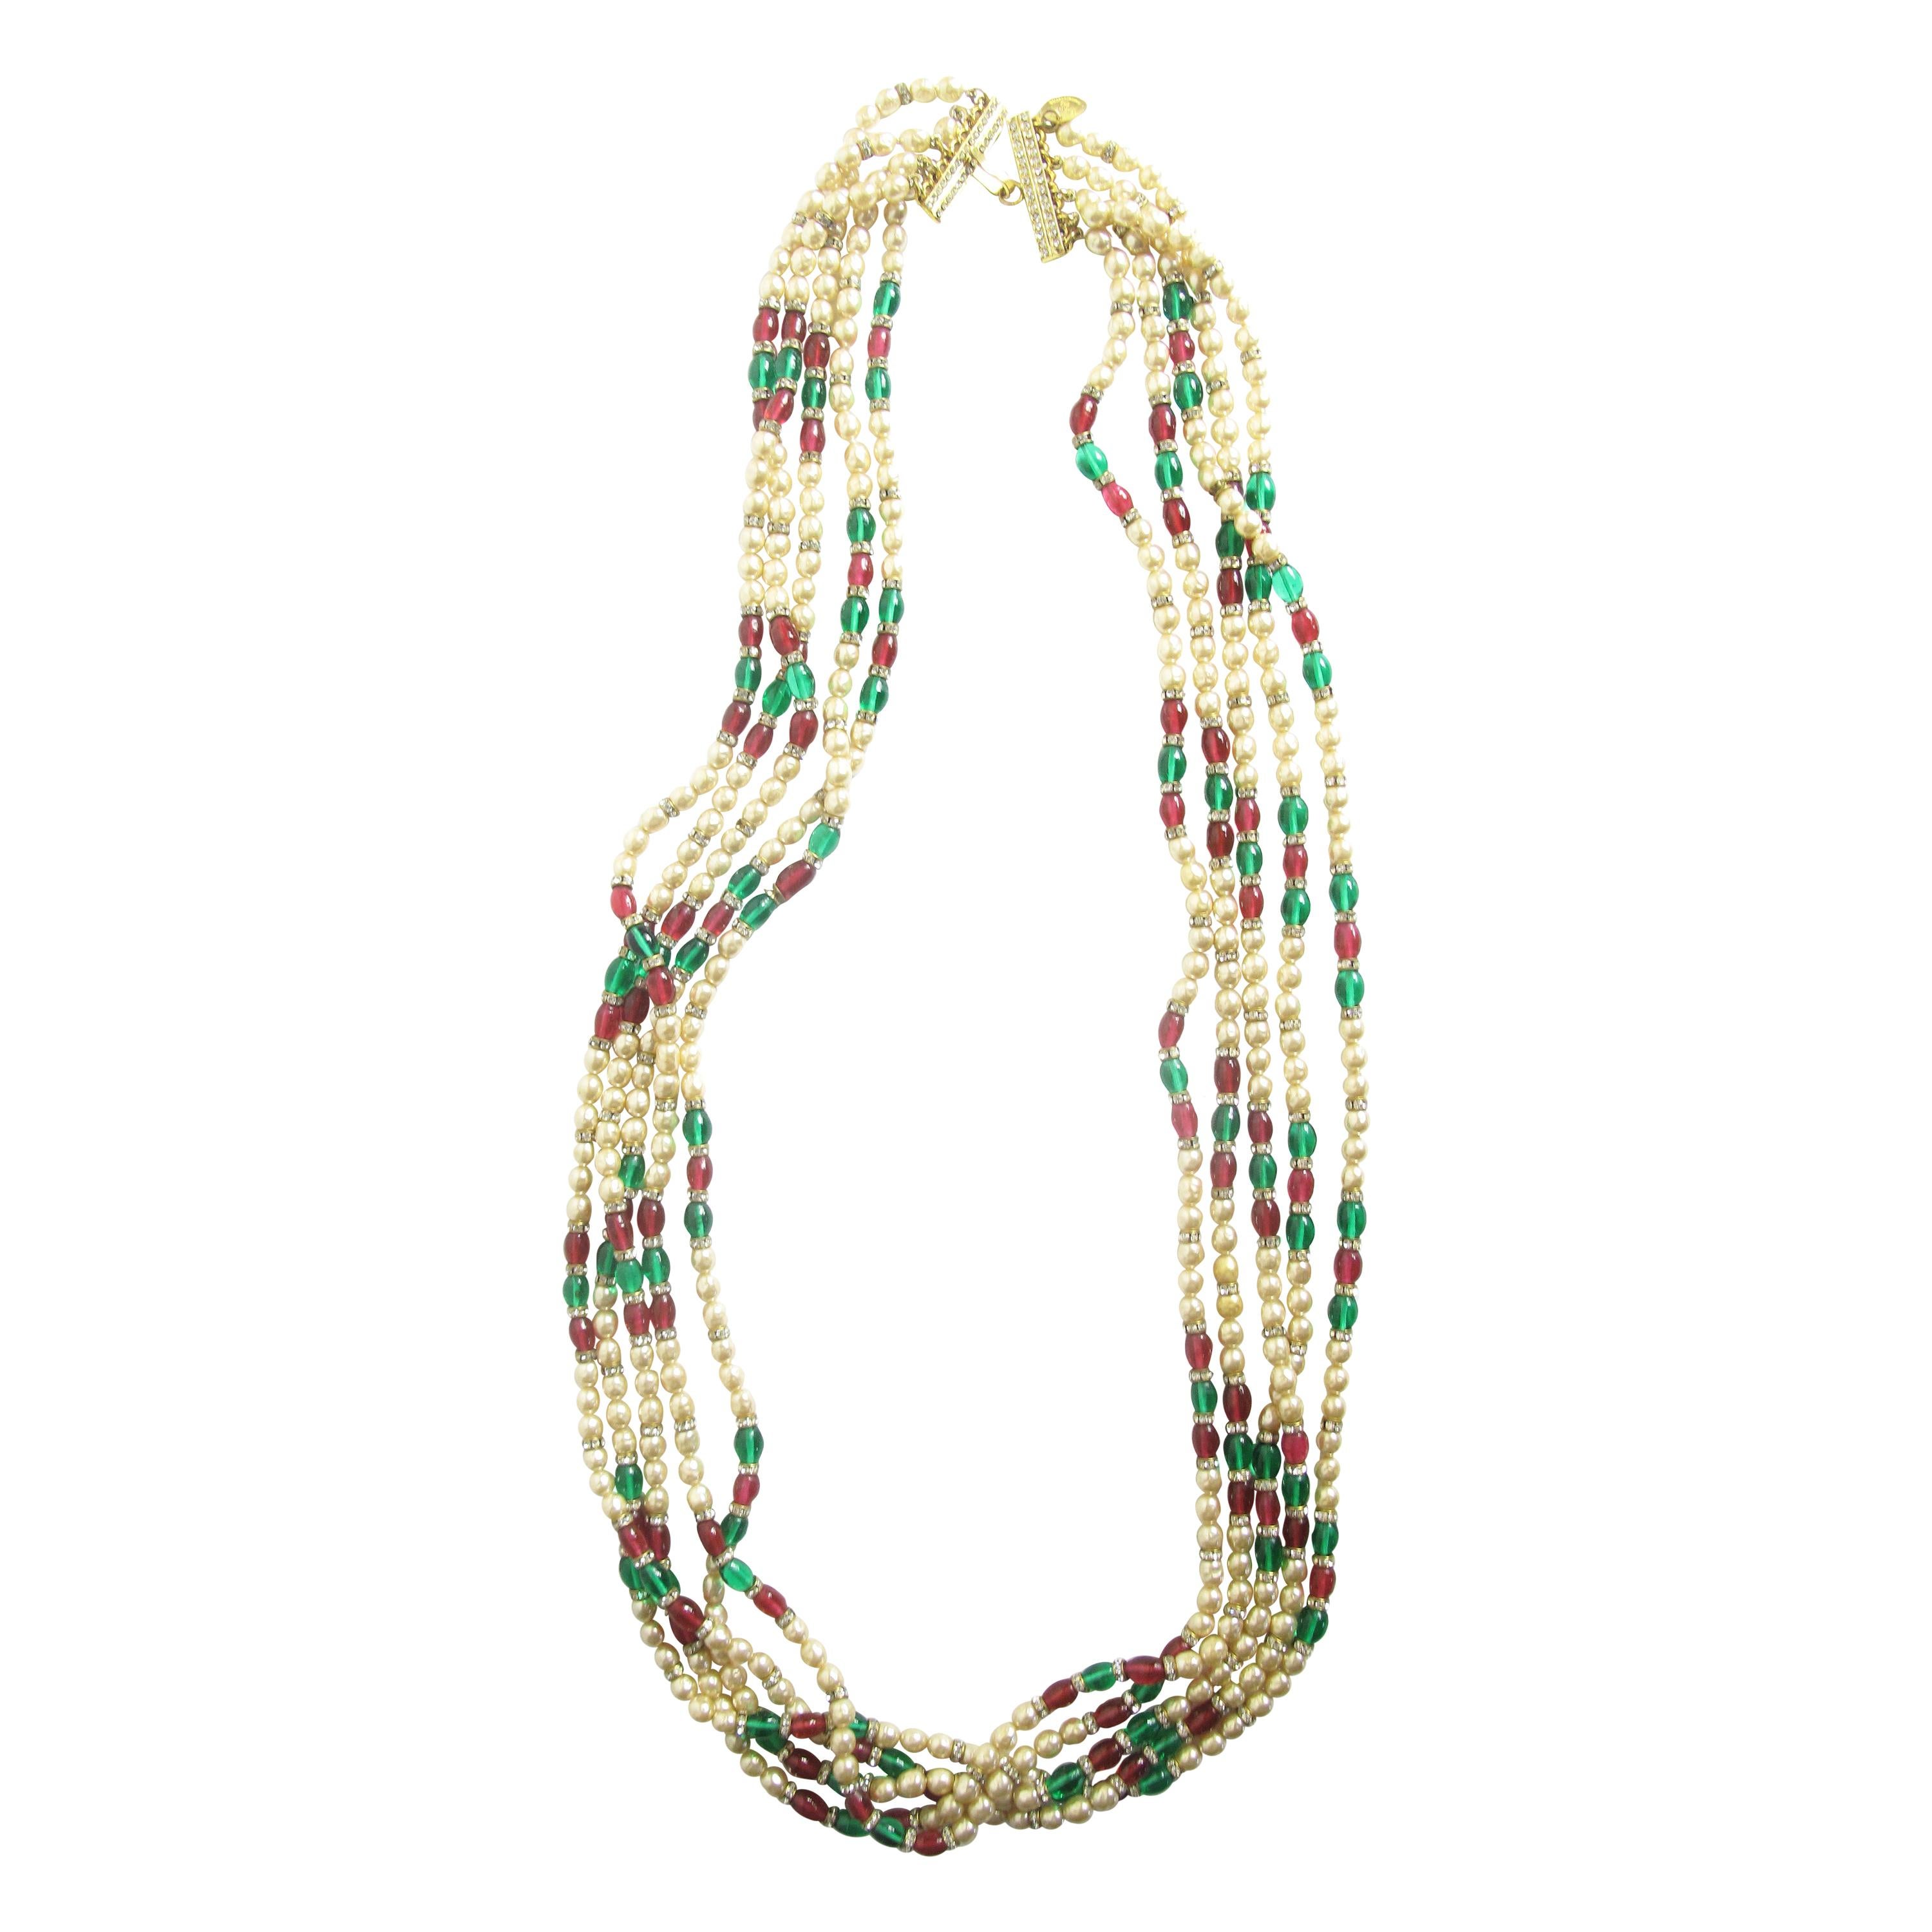 1970s Chanel Multi-strand Gripoix, Faux Pearls and Crystal Necklace